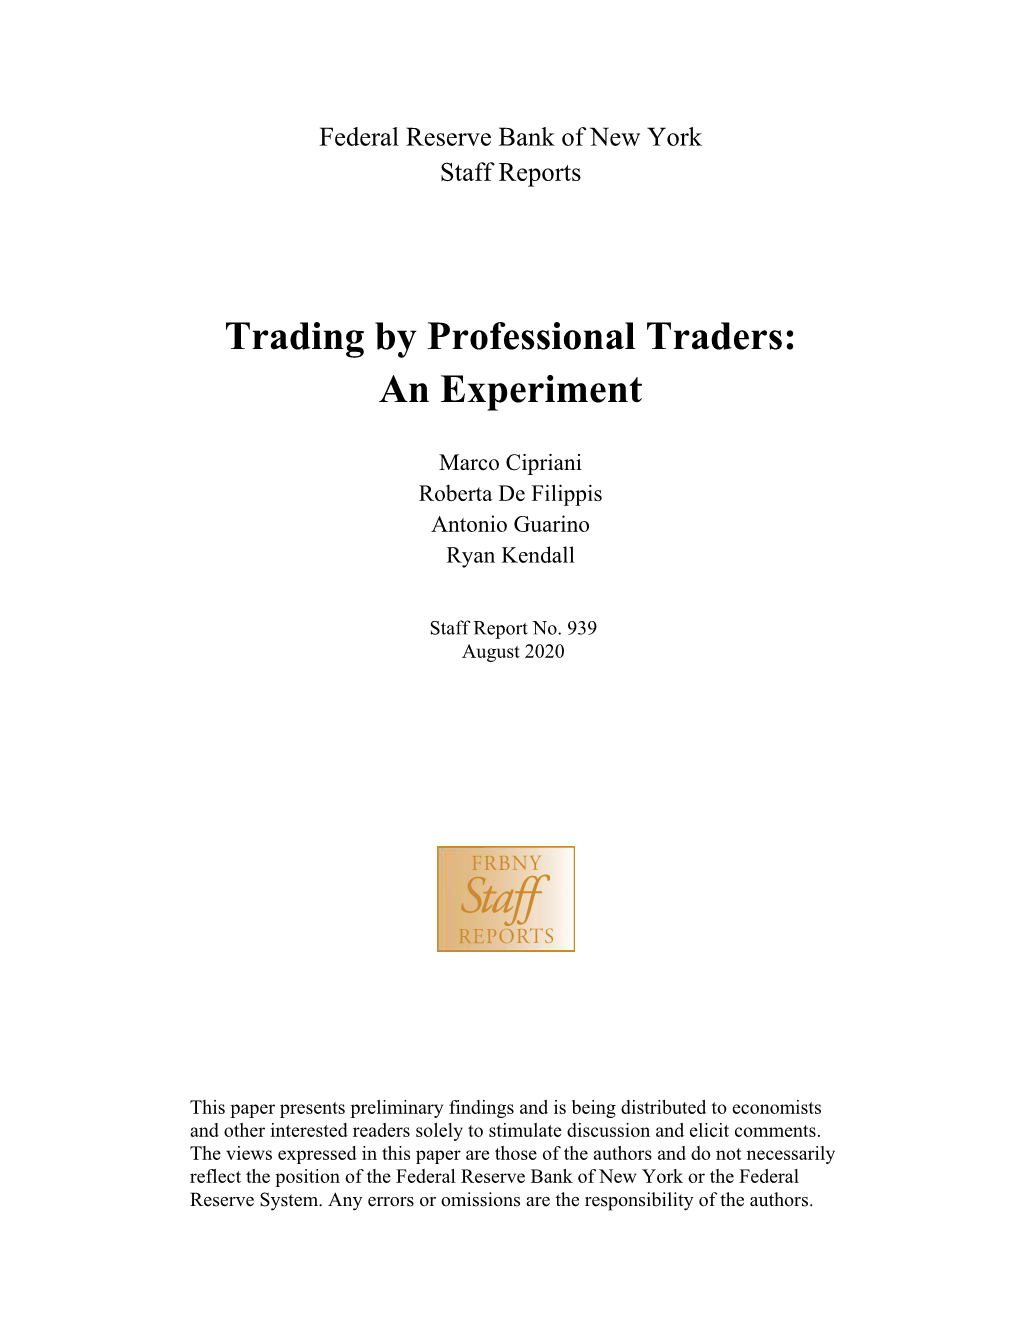 Trading by Professional Traders: an Experiment